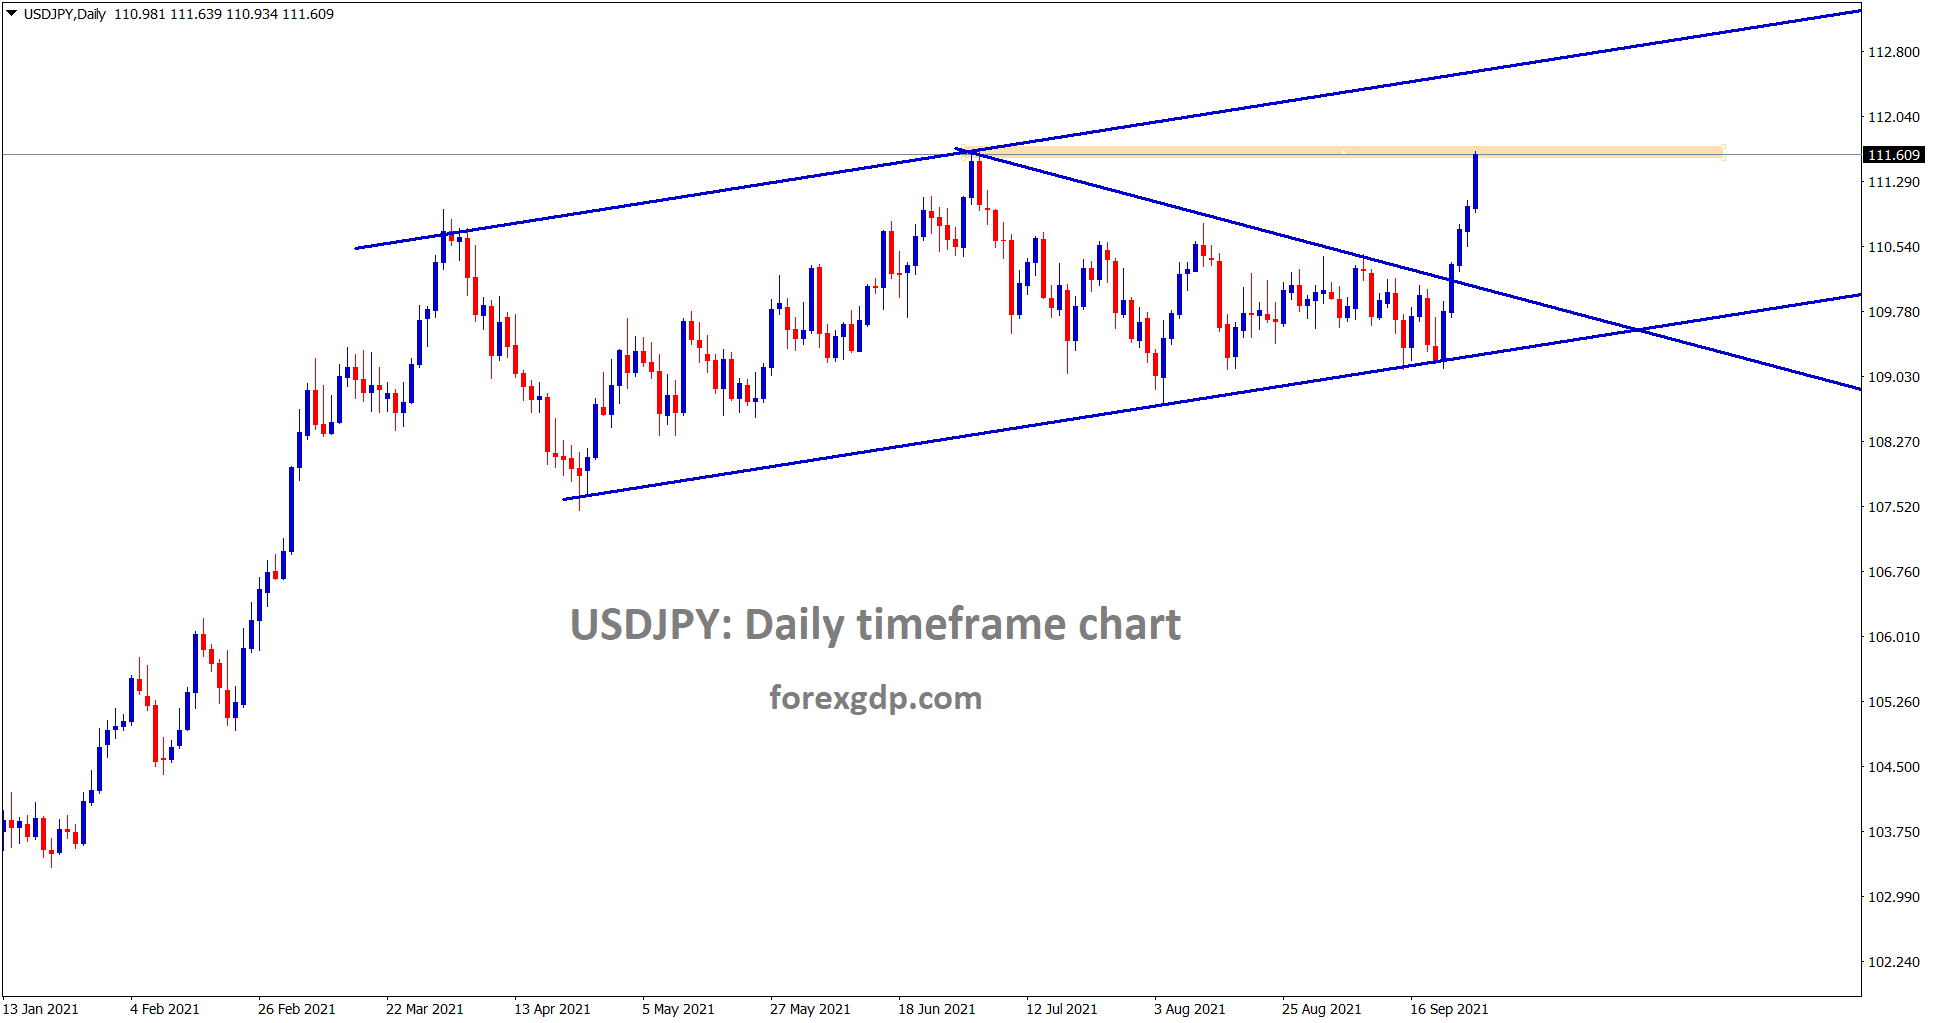 USDJPY has reached the horizontal resistance area 111.60 USDJPY is in strong bullish mode.